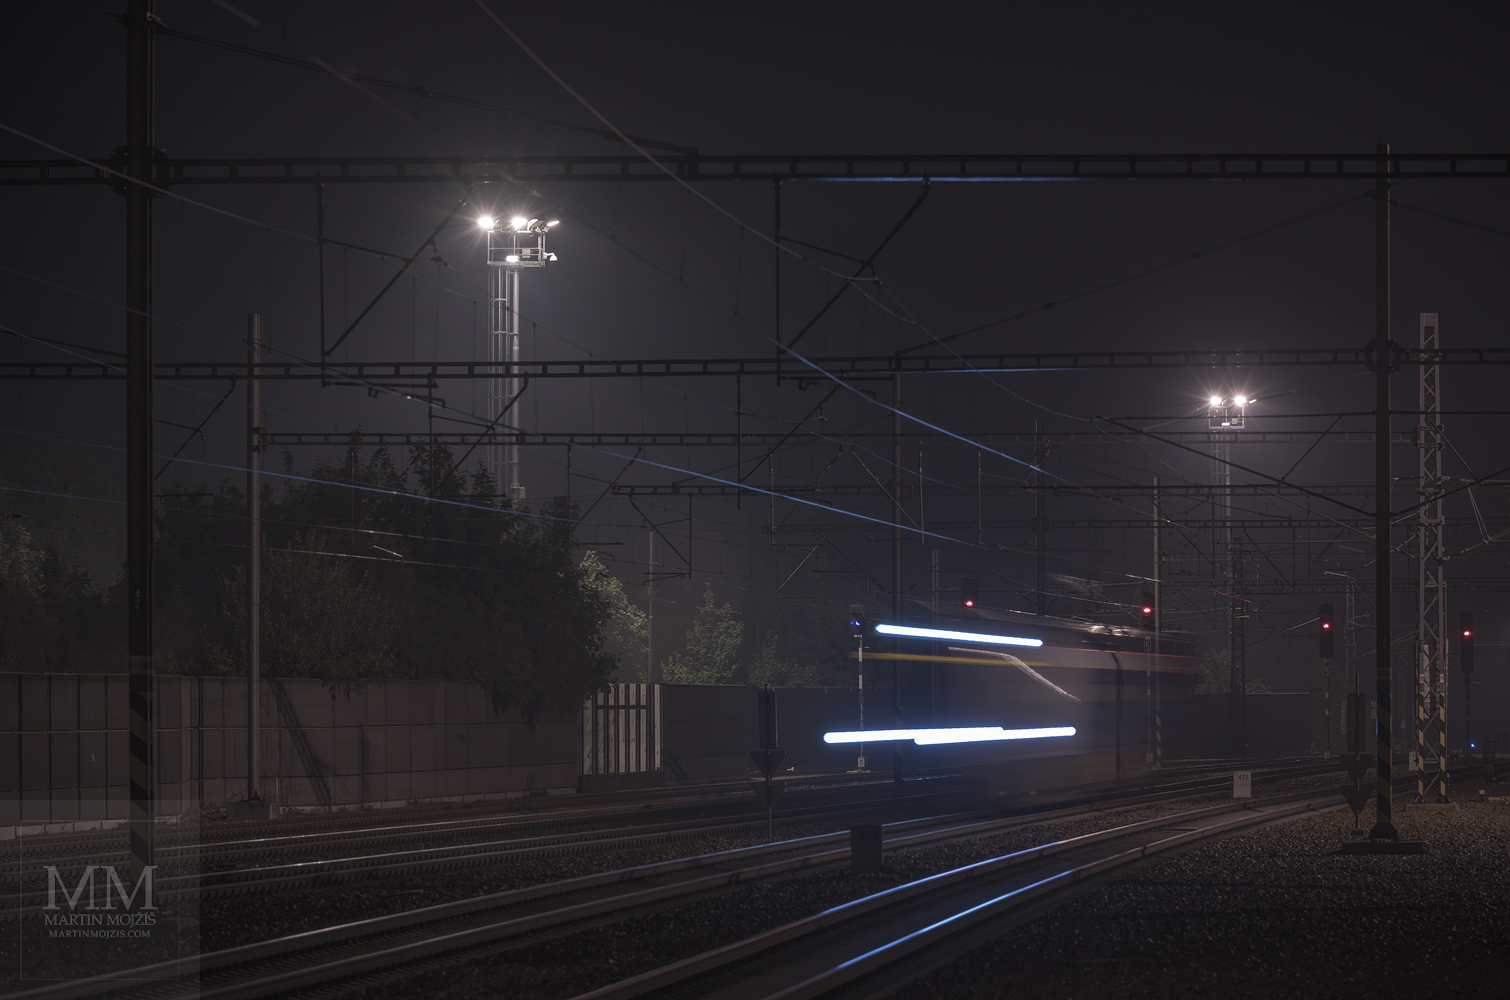 A locomotive running on a night track. Fine art photograph WAY THROUGH NIGHT, photographed by Martin Mojzis.